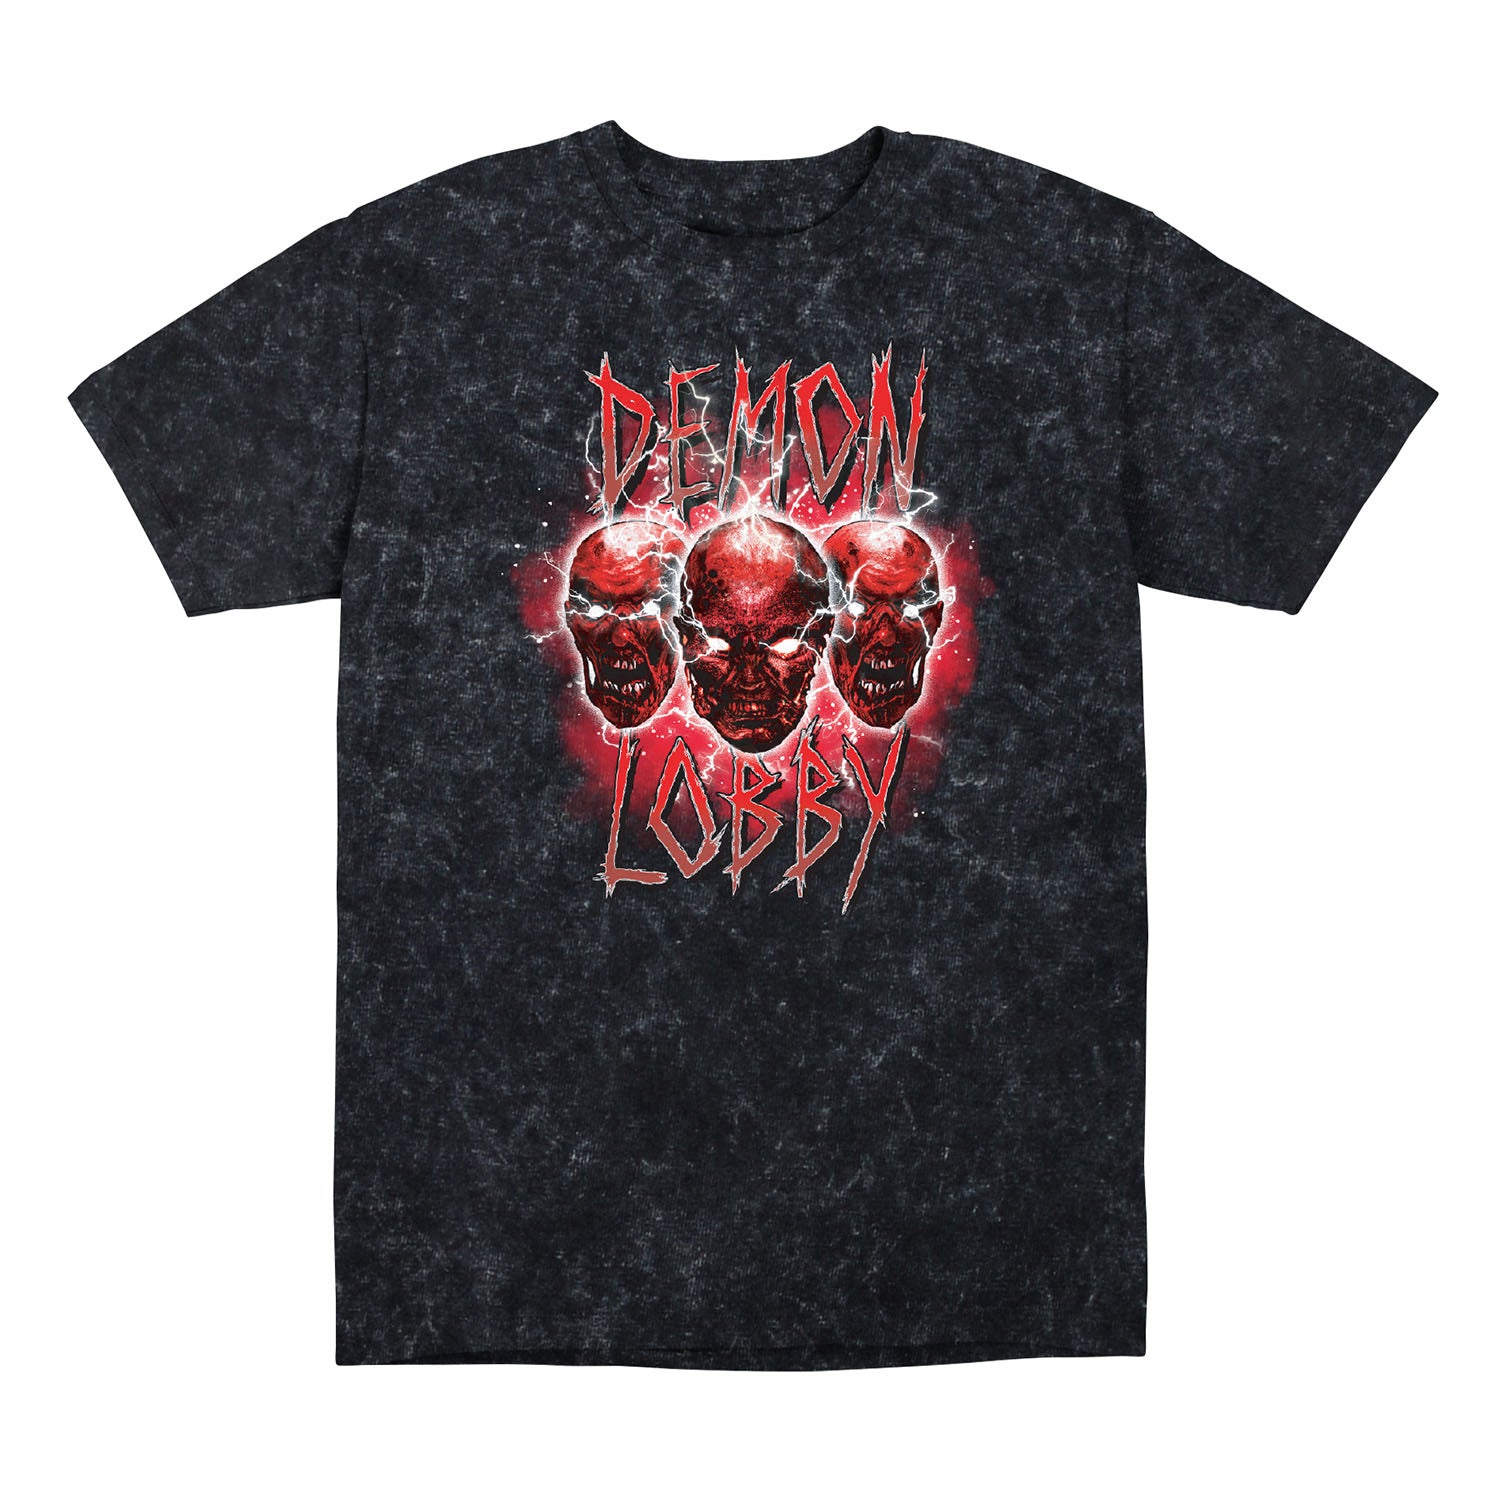 Call of Duty Demon Lobby Mineral Wash T-Shirt